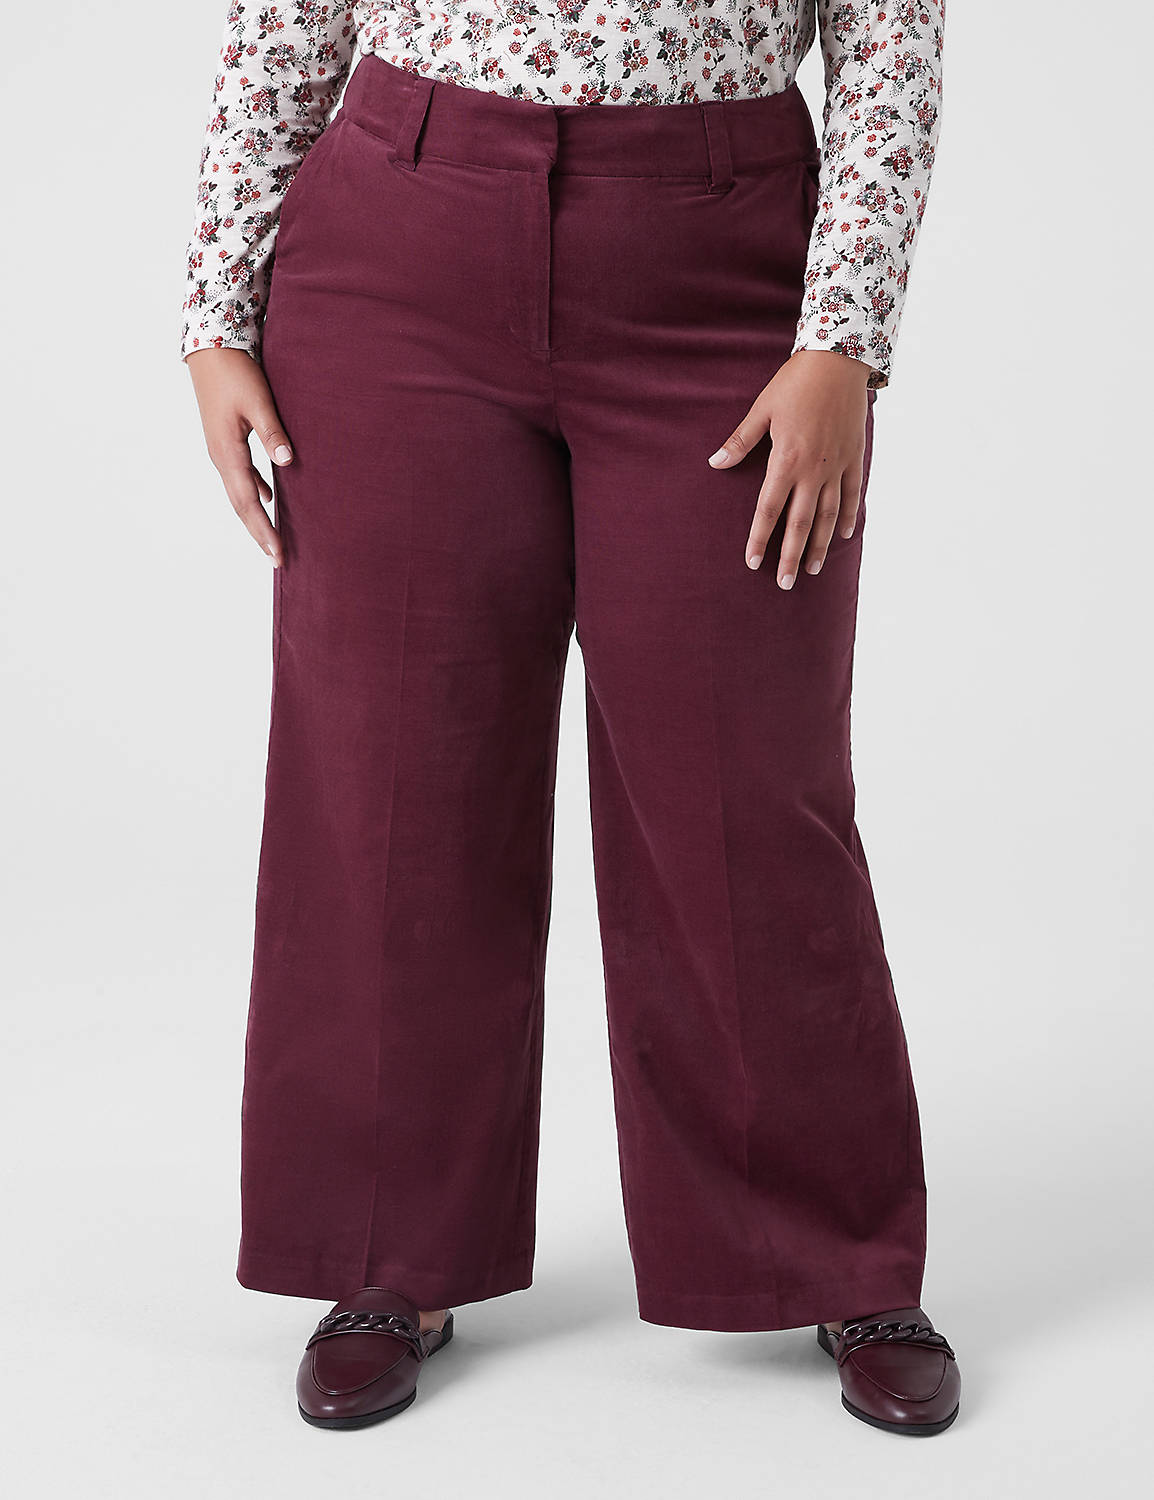 THE CORD TROUSER 1136339 Product Image 1